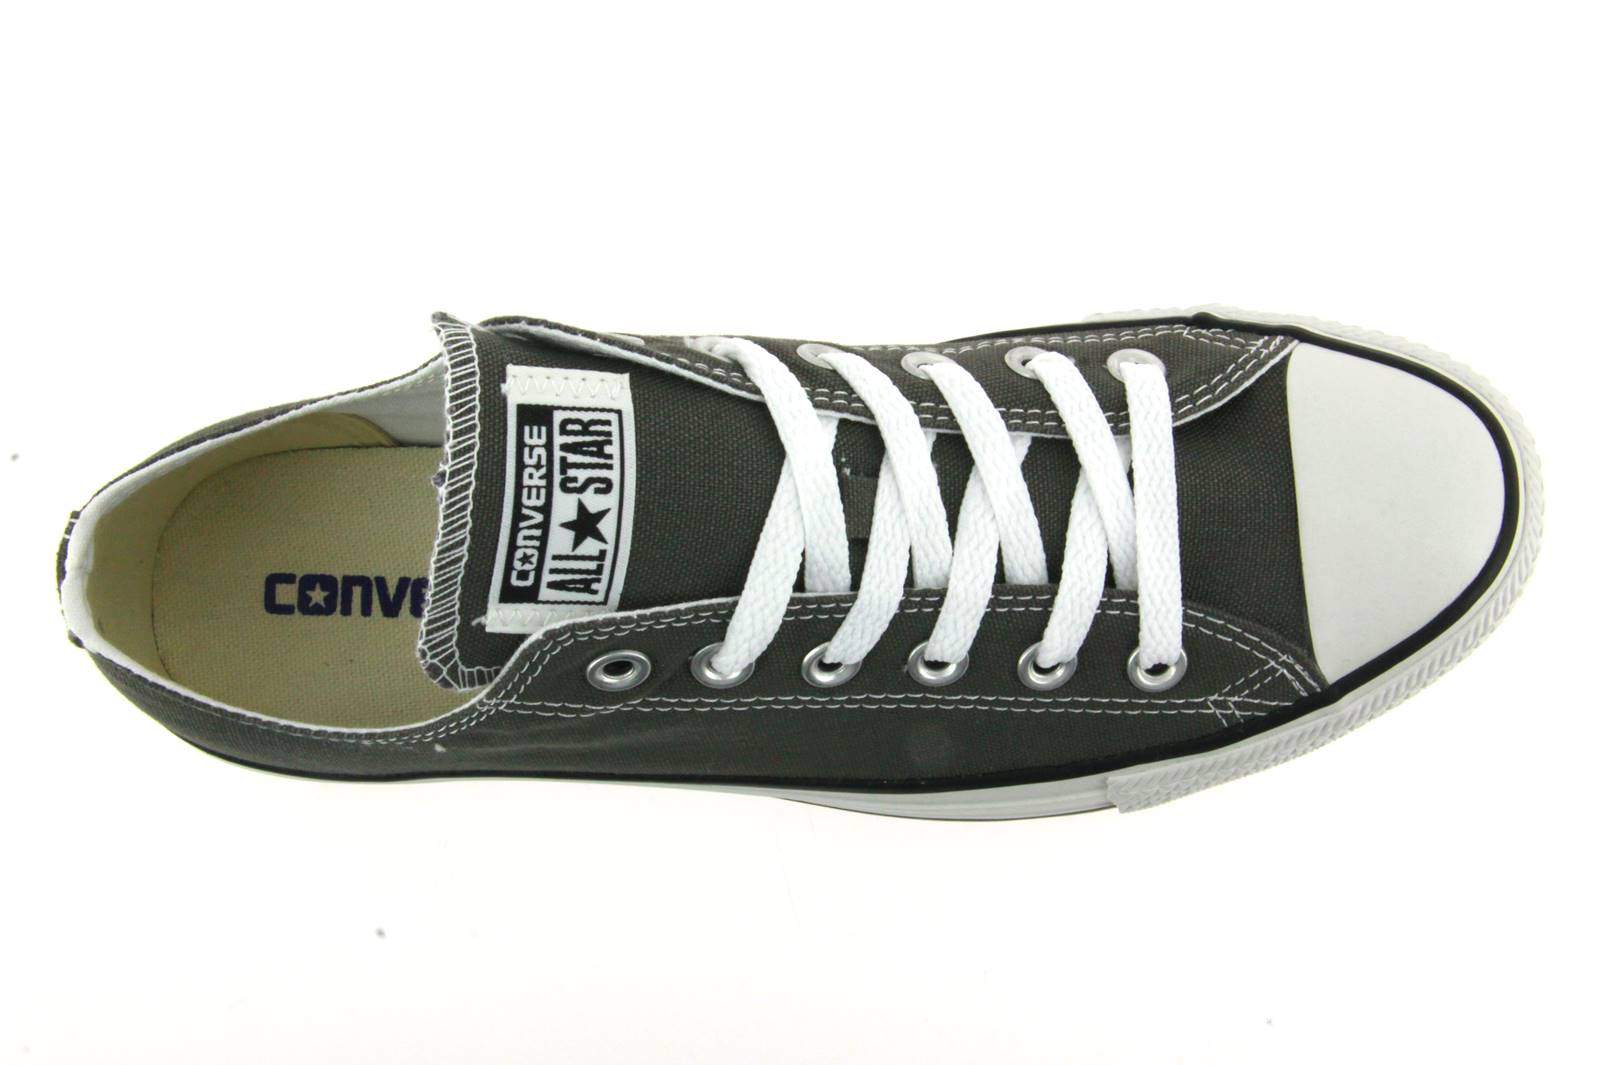 Converse ALL STAR CHUCK TAYLOR CHARCOAL (40)